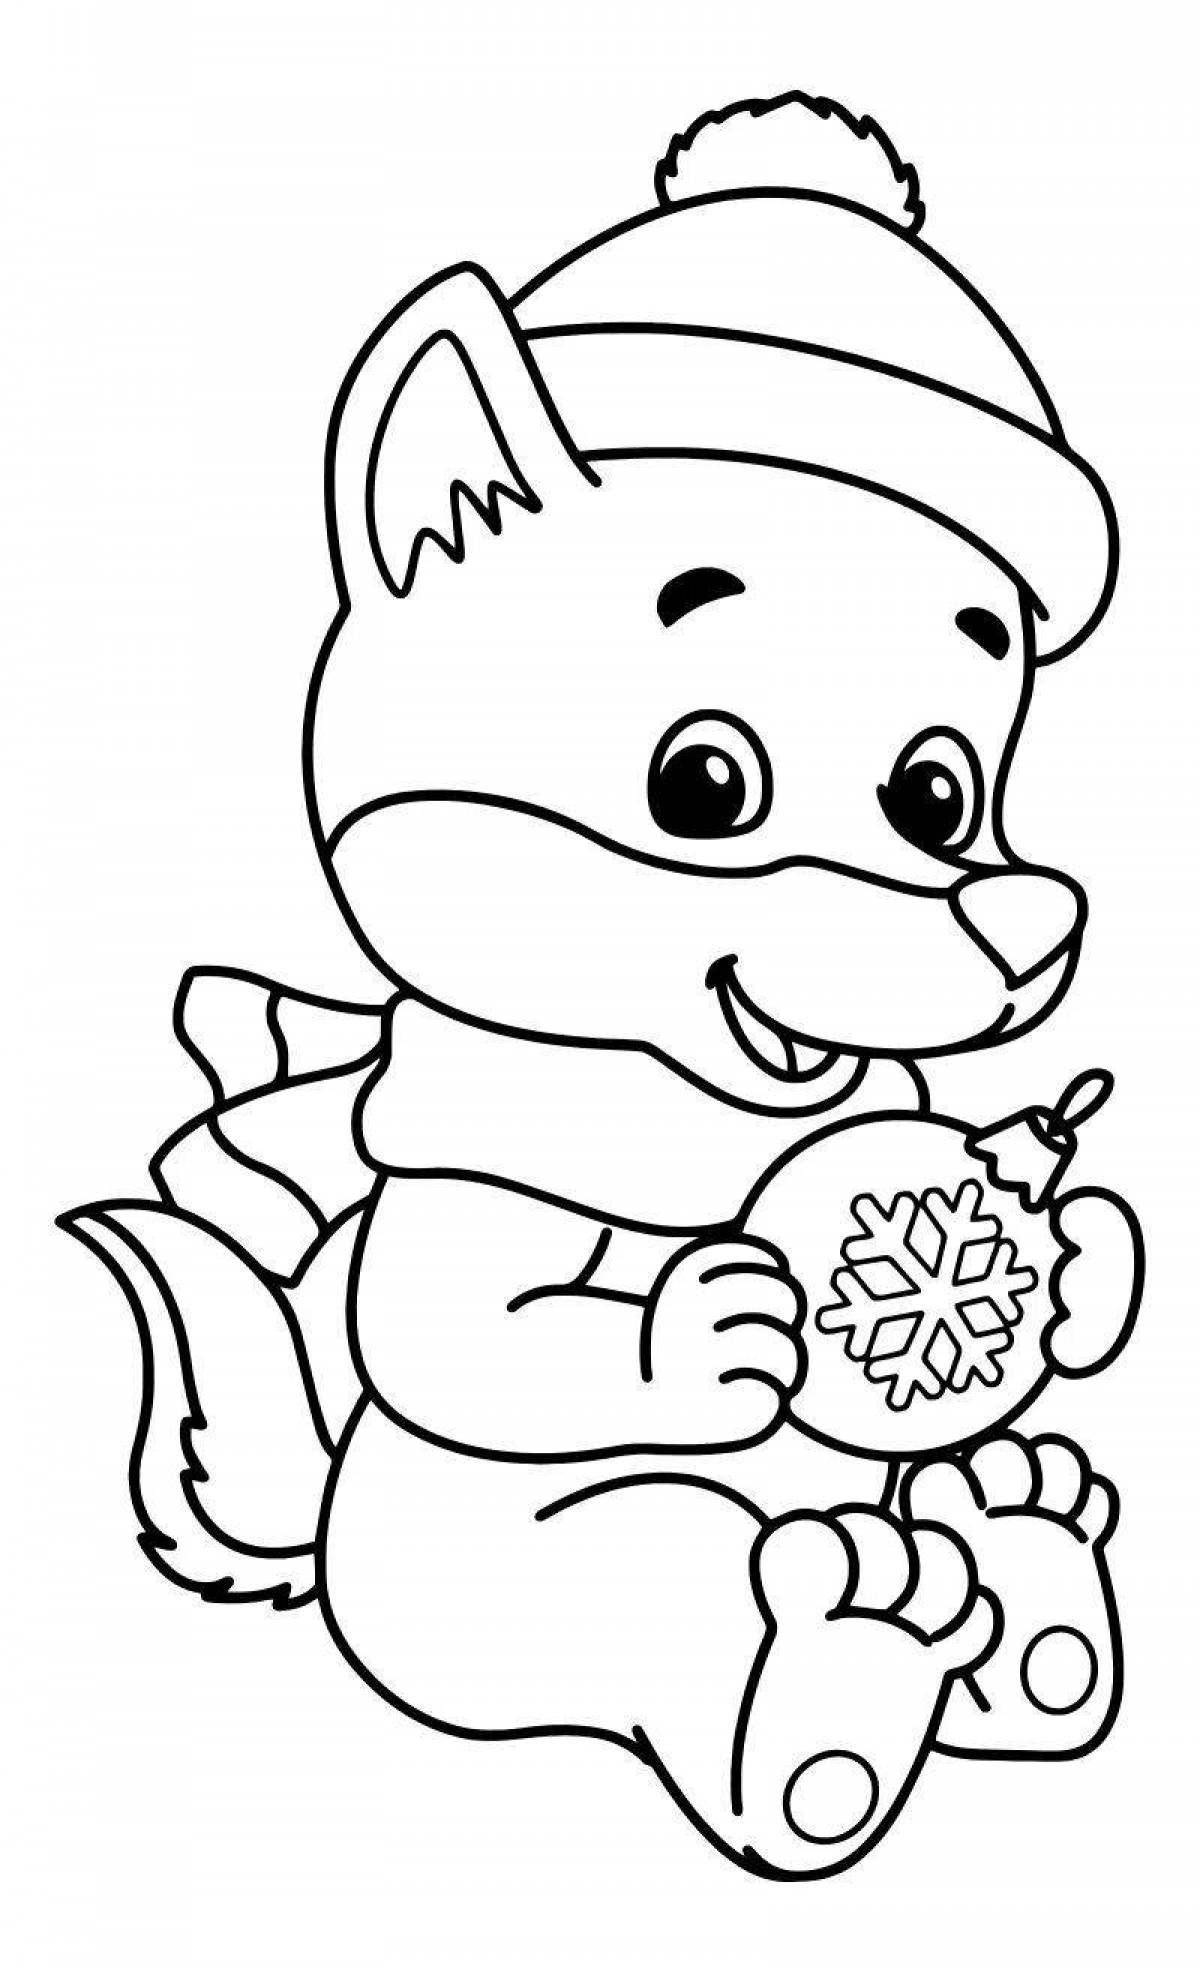 Radiant Christmas wolf coloring page